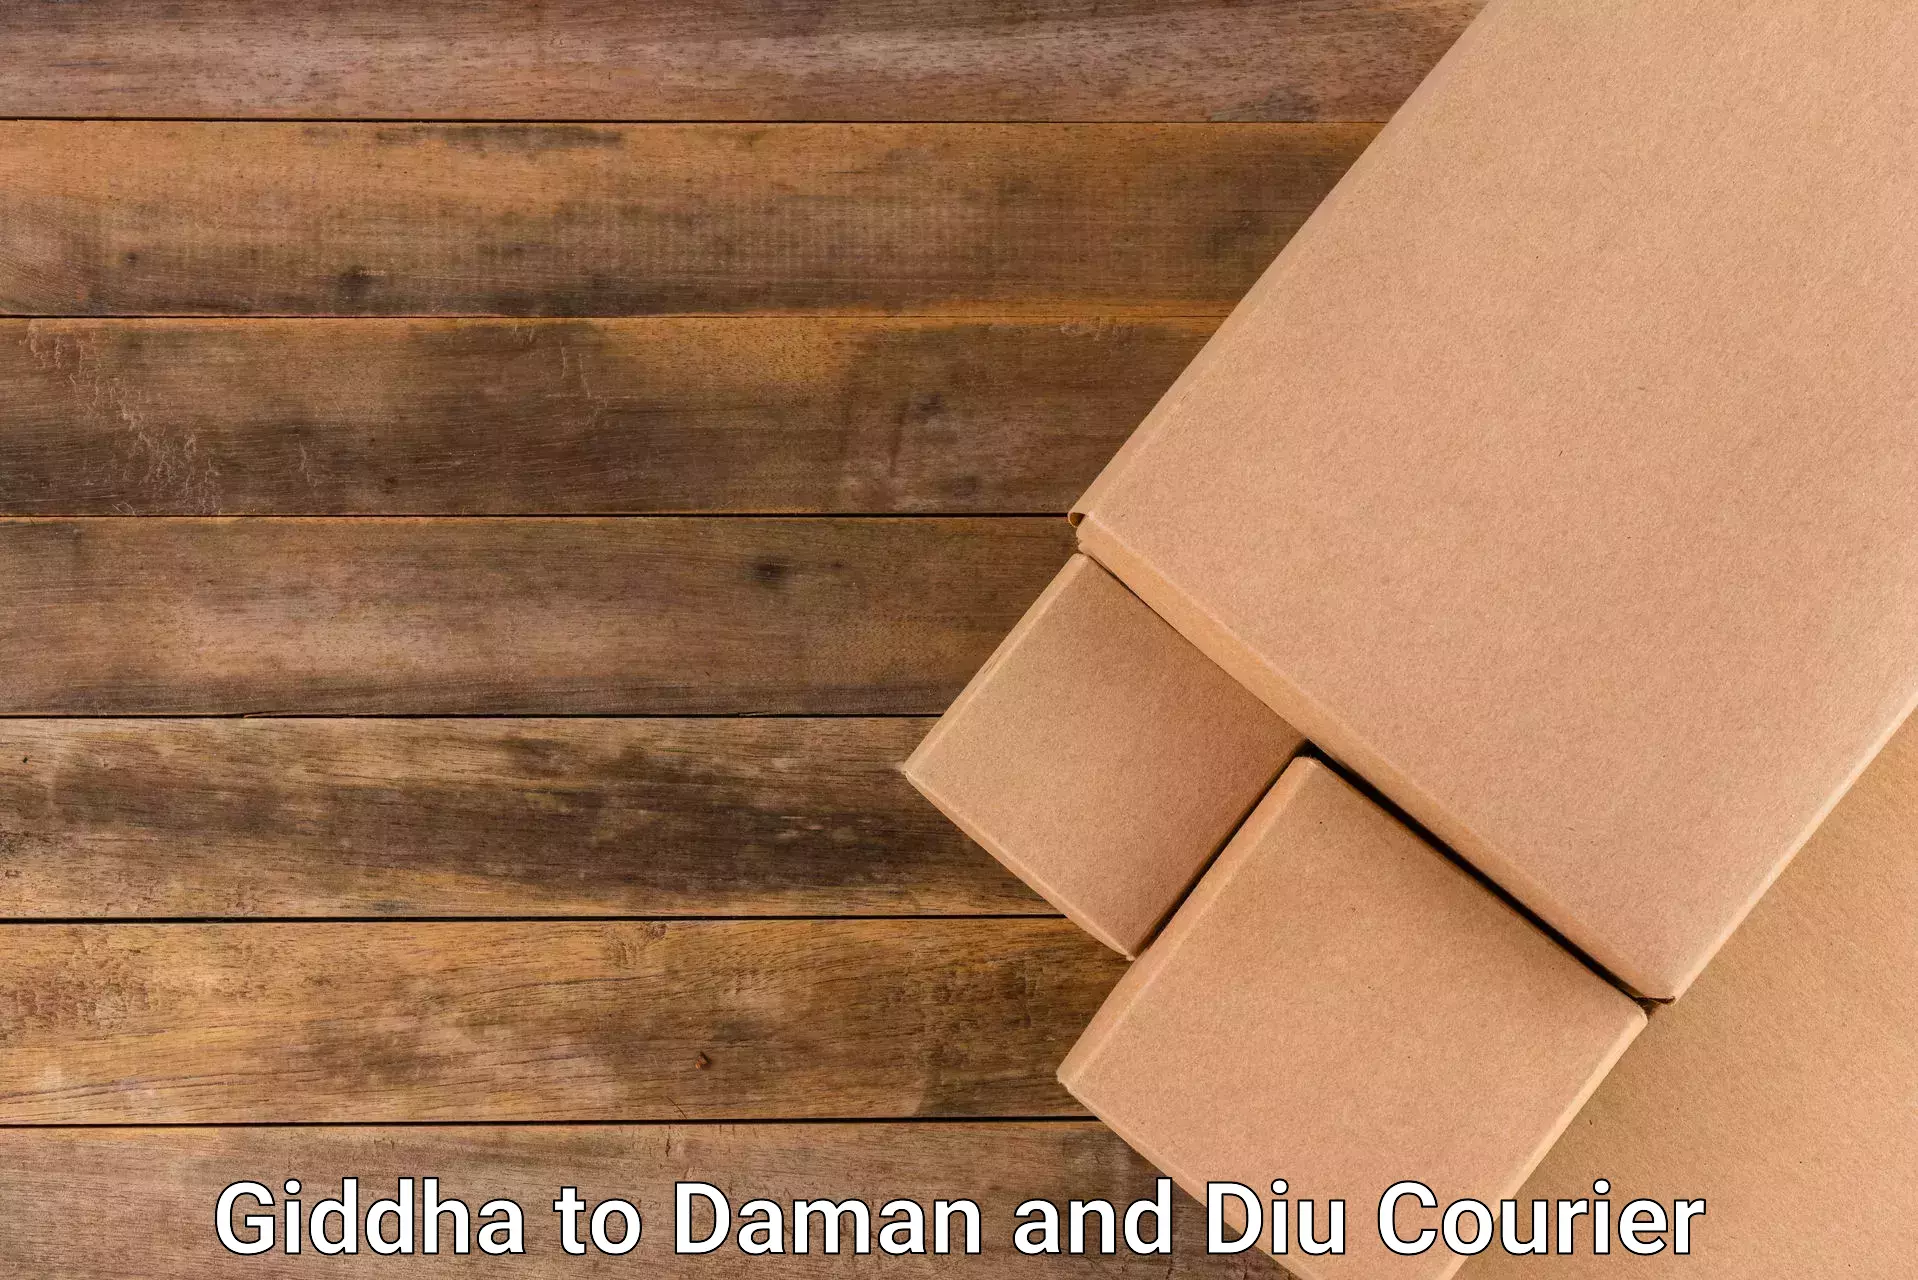 Subscription-based courier Giddha to Diu